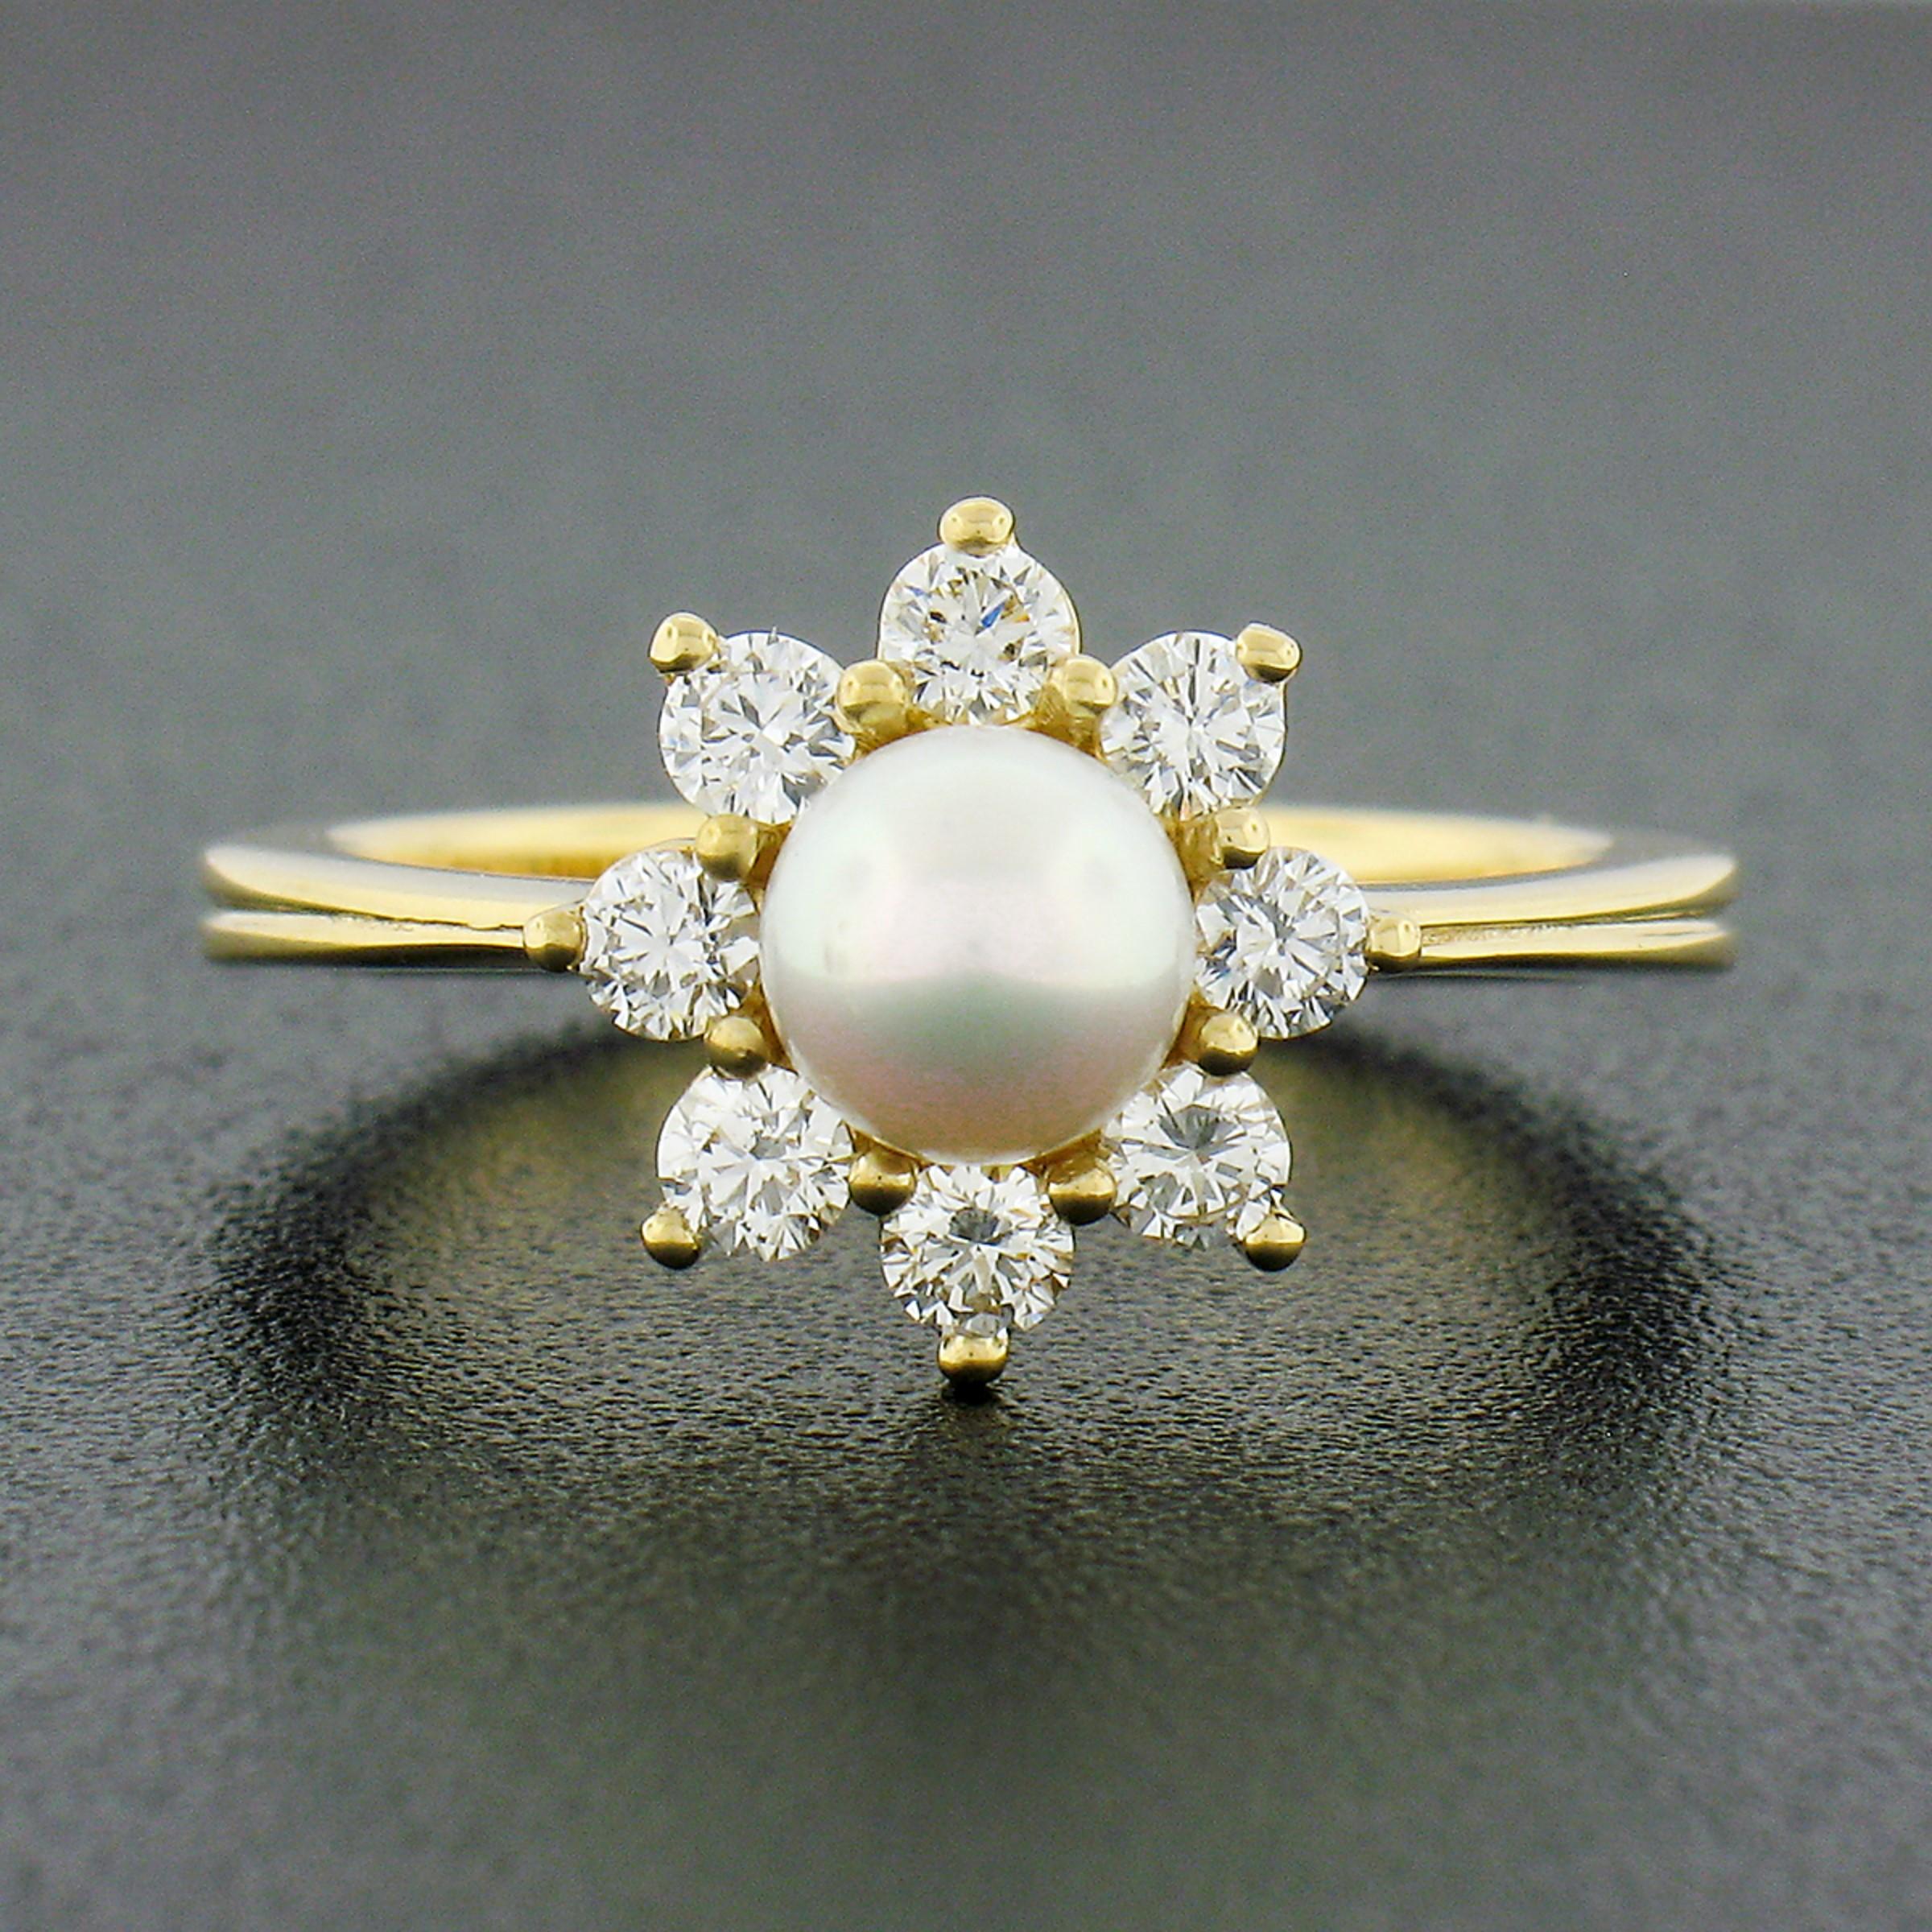 This classic pearl and diamond flower cluster ring is newly crafted in solid 18k yellow gold. It is neatly set at the center with a round cultured pearl that shows a nice white color with amazing luster. The pearl is further surround and accented by